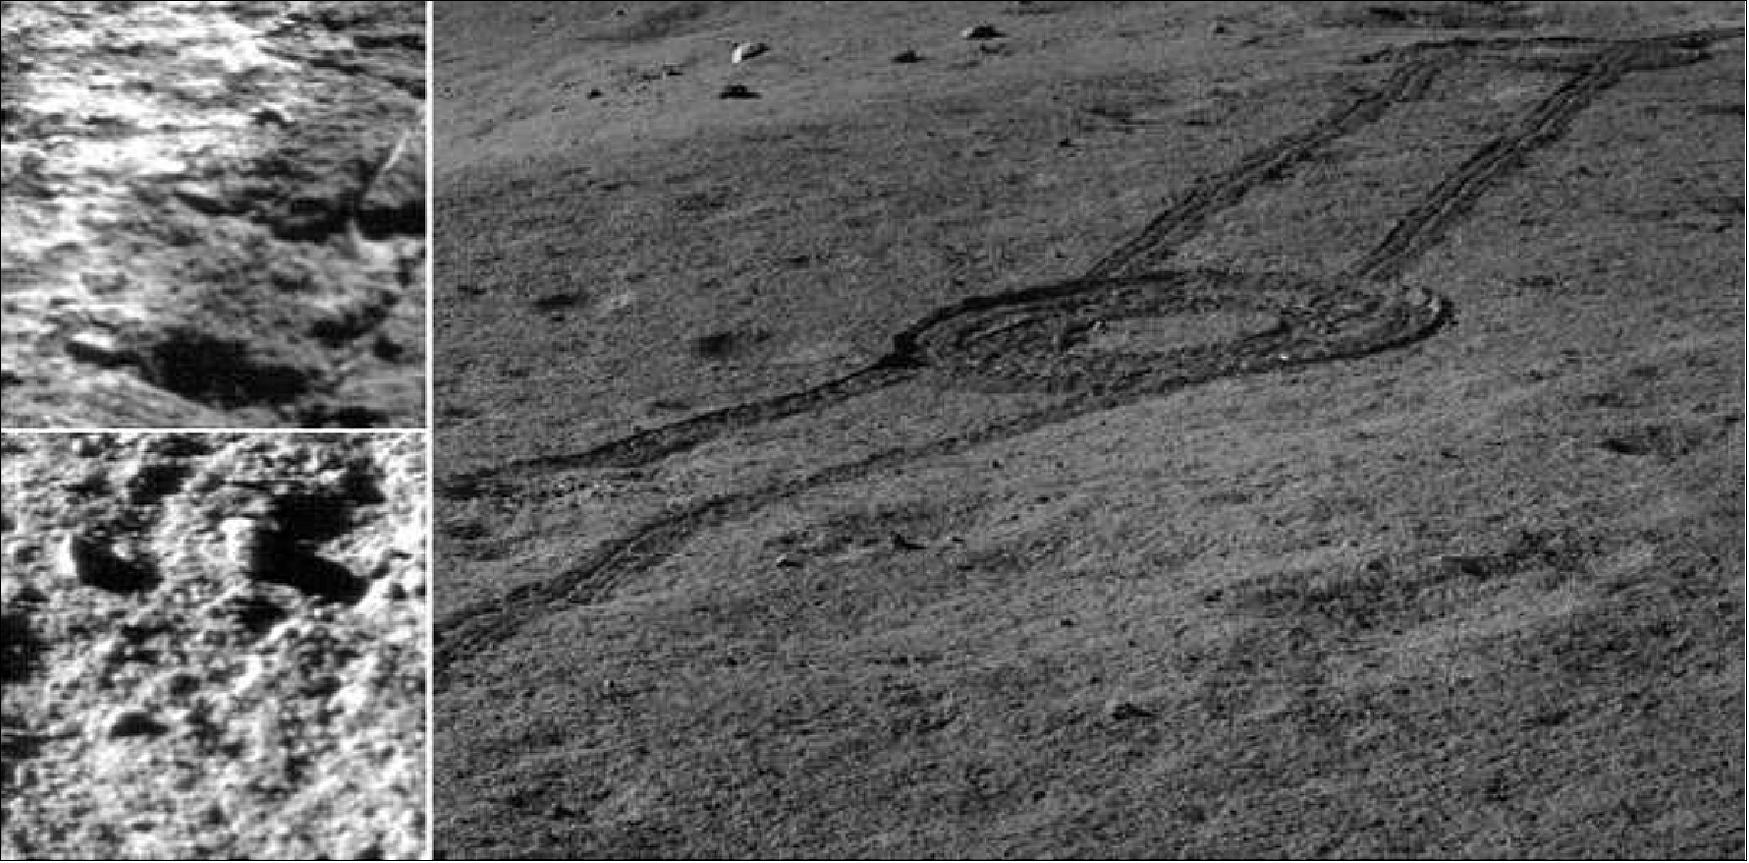 Figure 23: An image captured by Chang'E 4 is showing the landscape near the landing site (image credit: NAOC/CNSA)